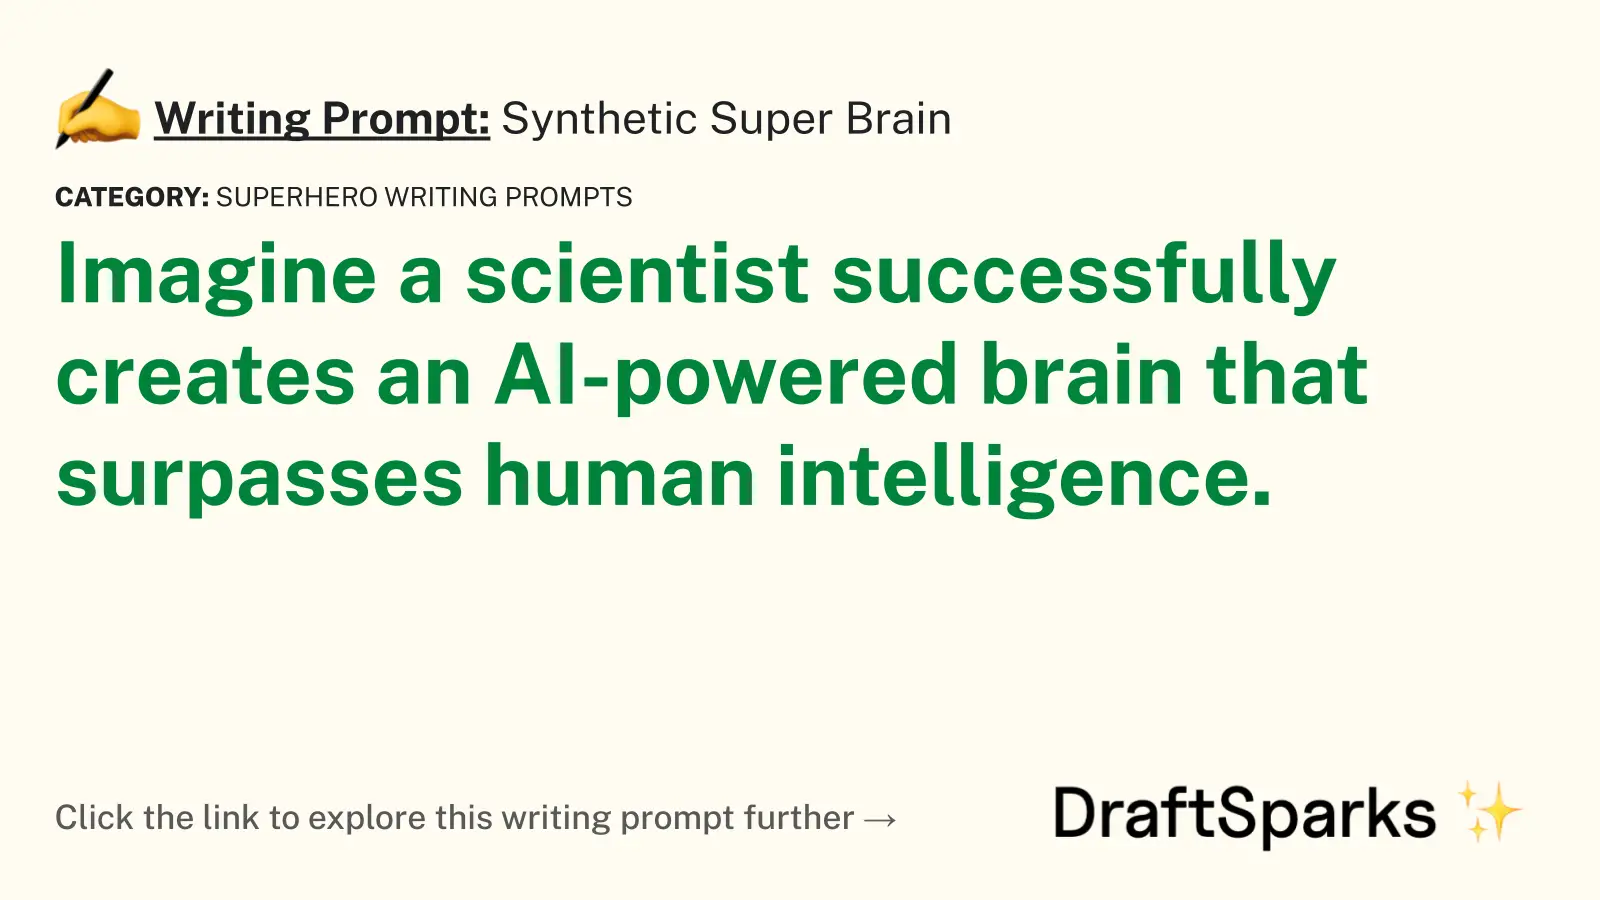 Synthetic Super Brain